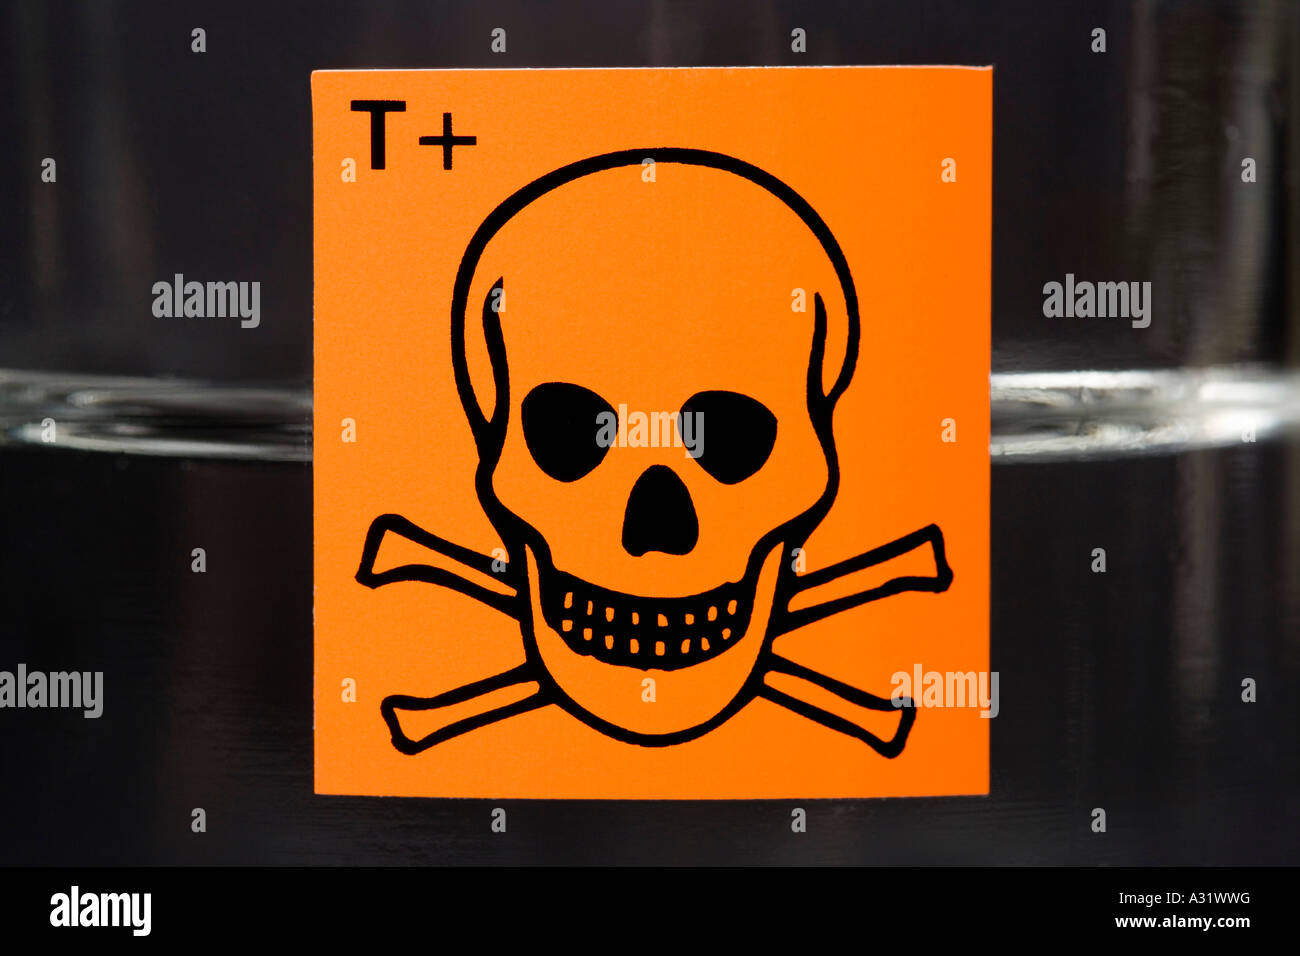 Toxic substance label with skull and crossbones on glass flask containing liquid Stock Photo